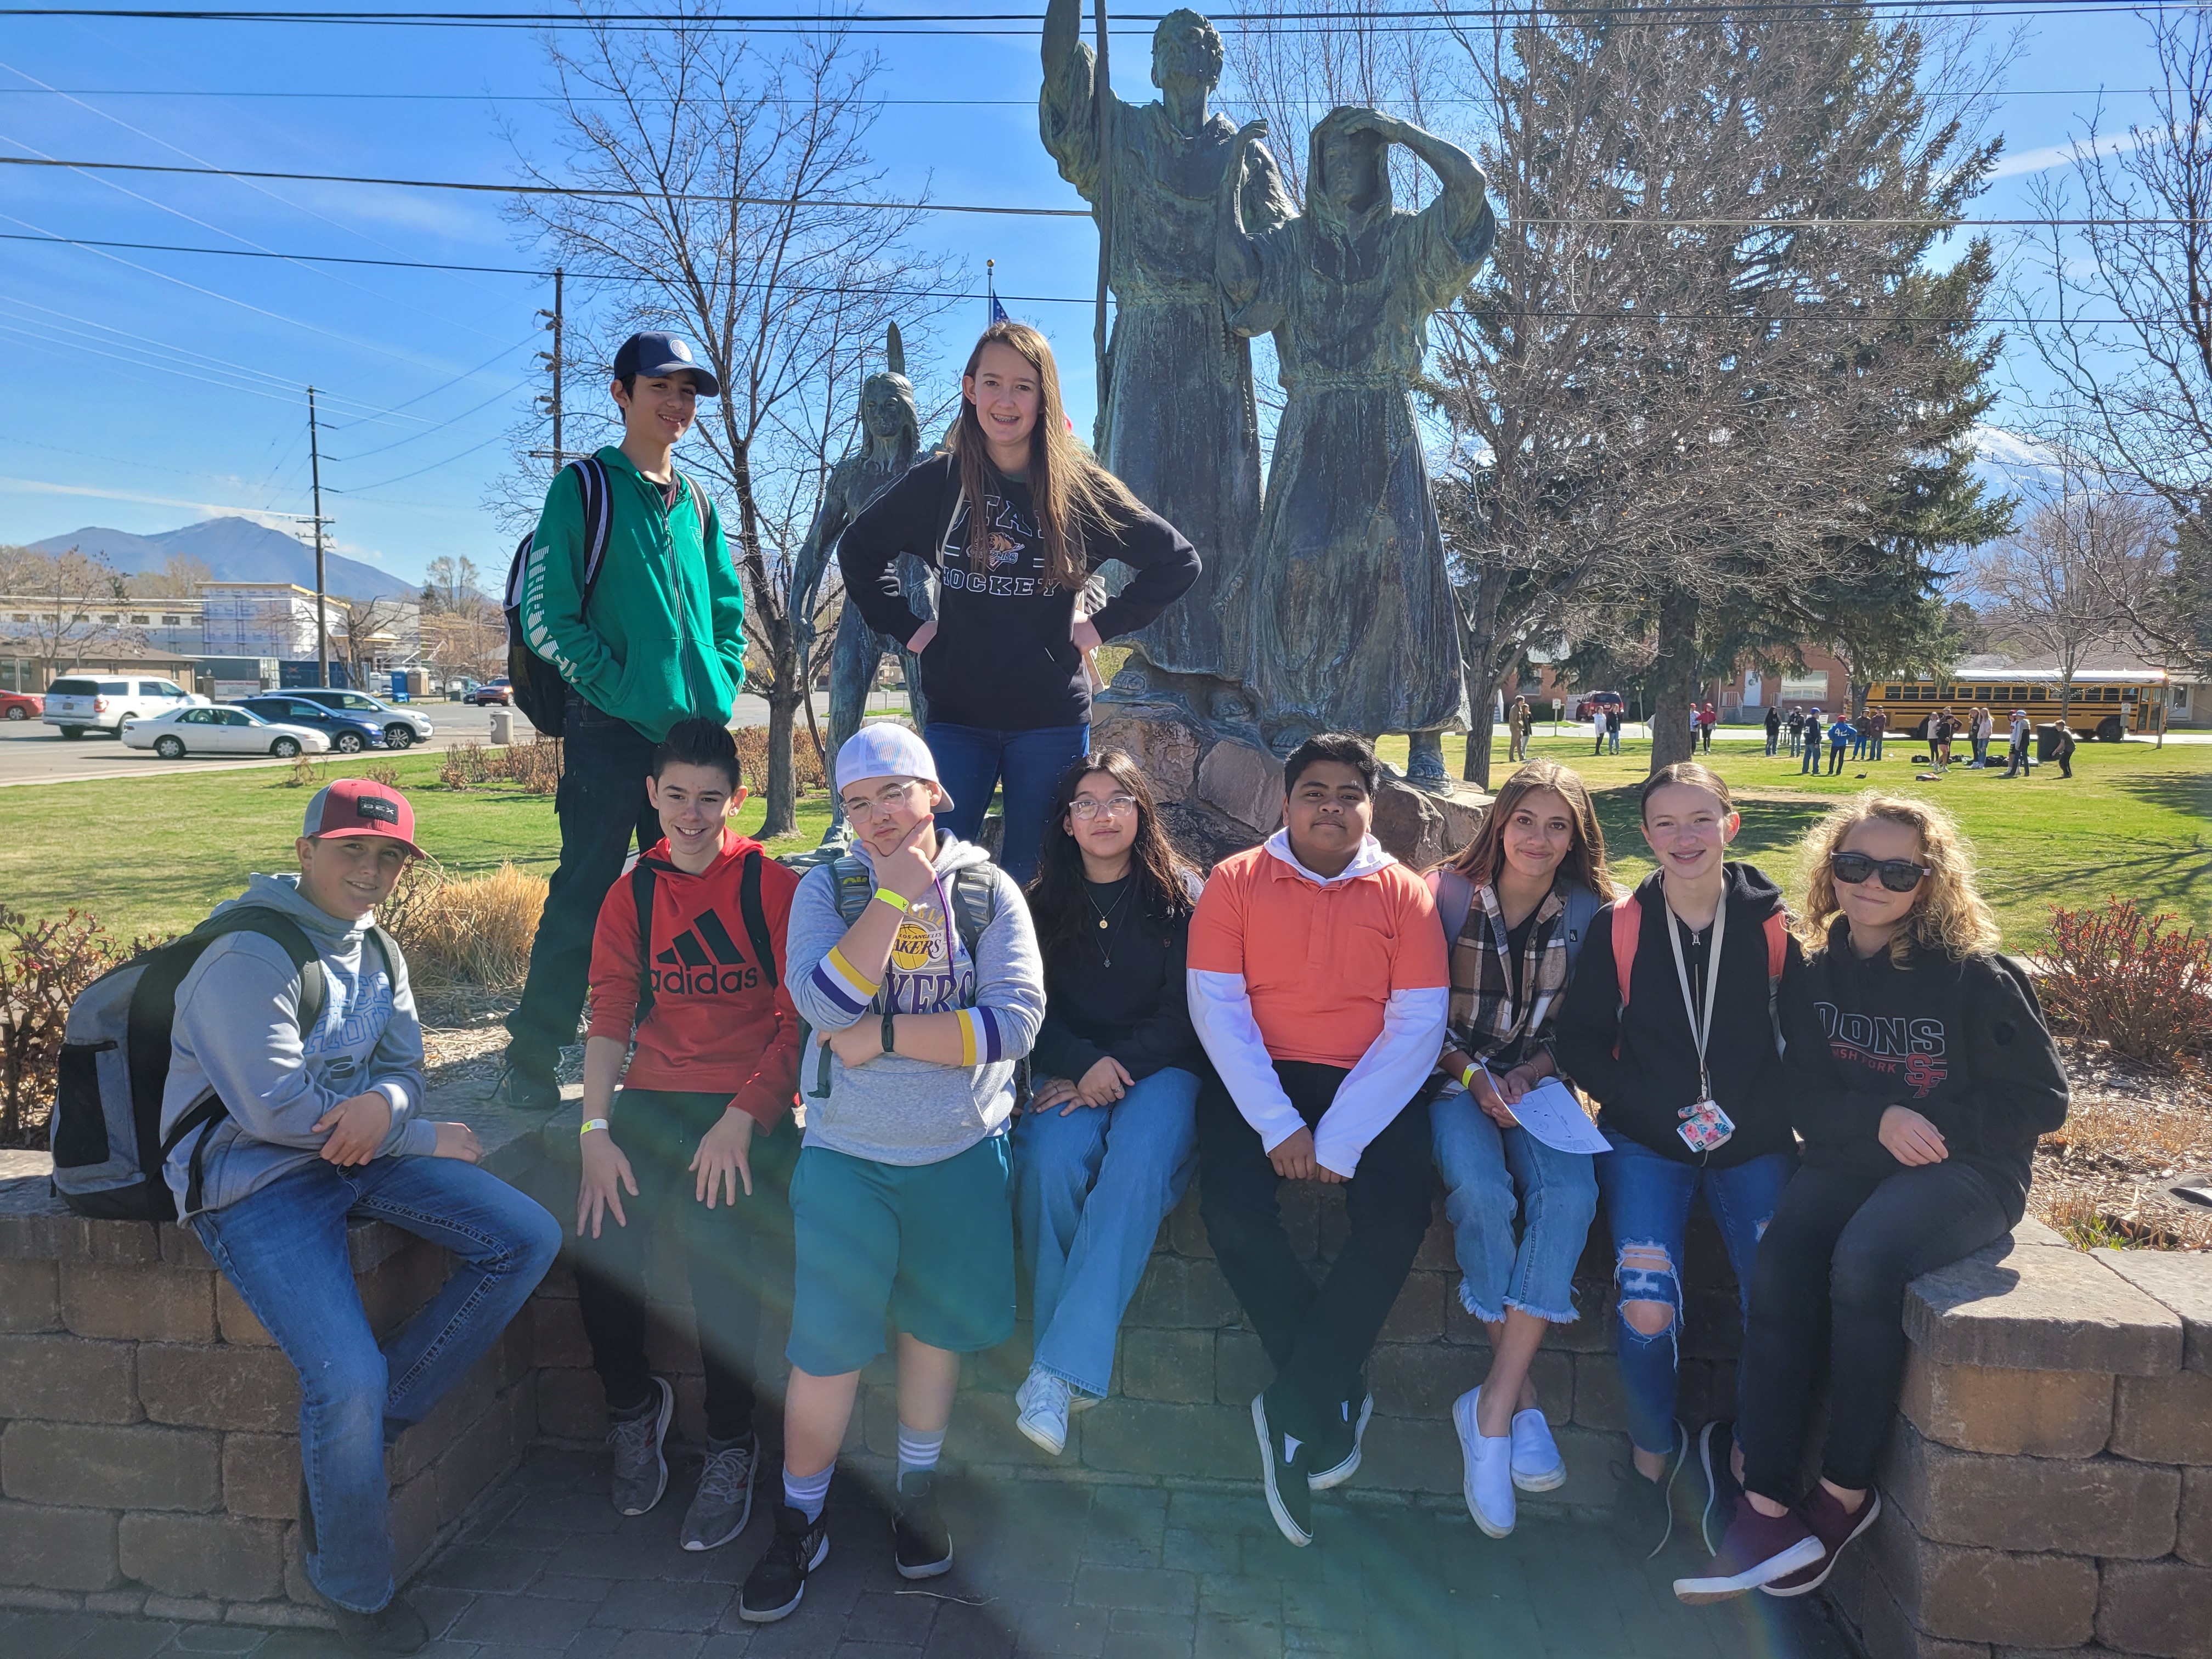 Students at the Escalante/Dominguez statue in the Spanish Fork City Park